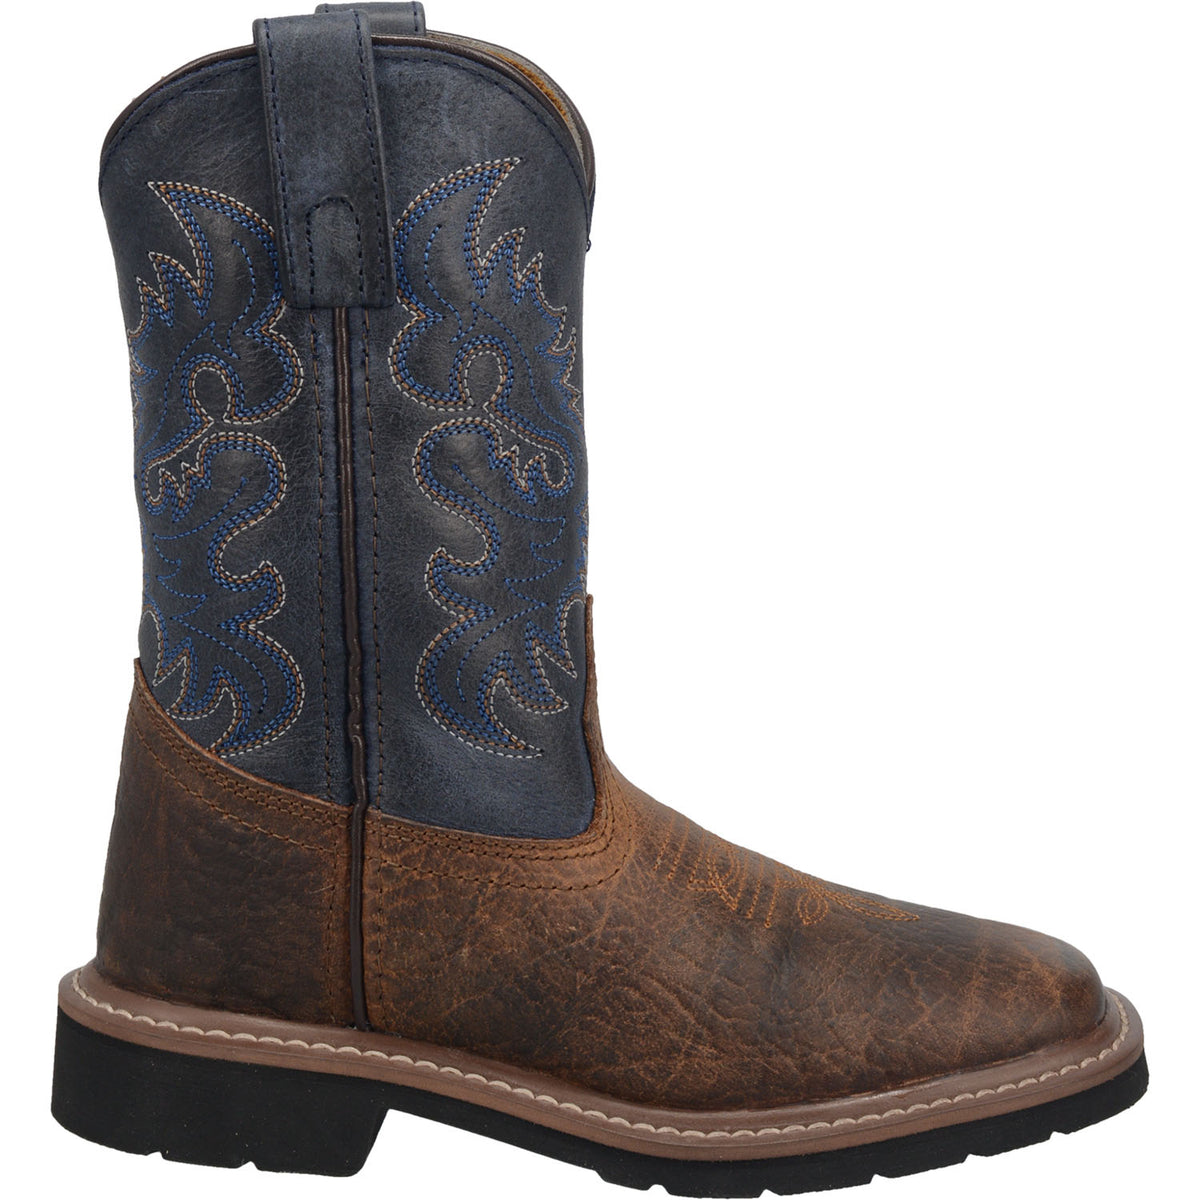 BRANTLEY LEATHER CHILDREN'S BOOT Image